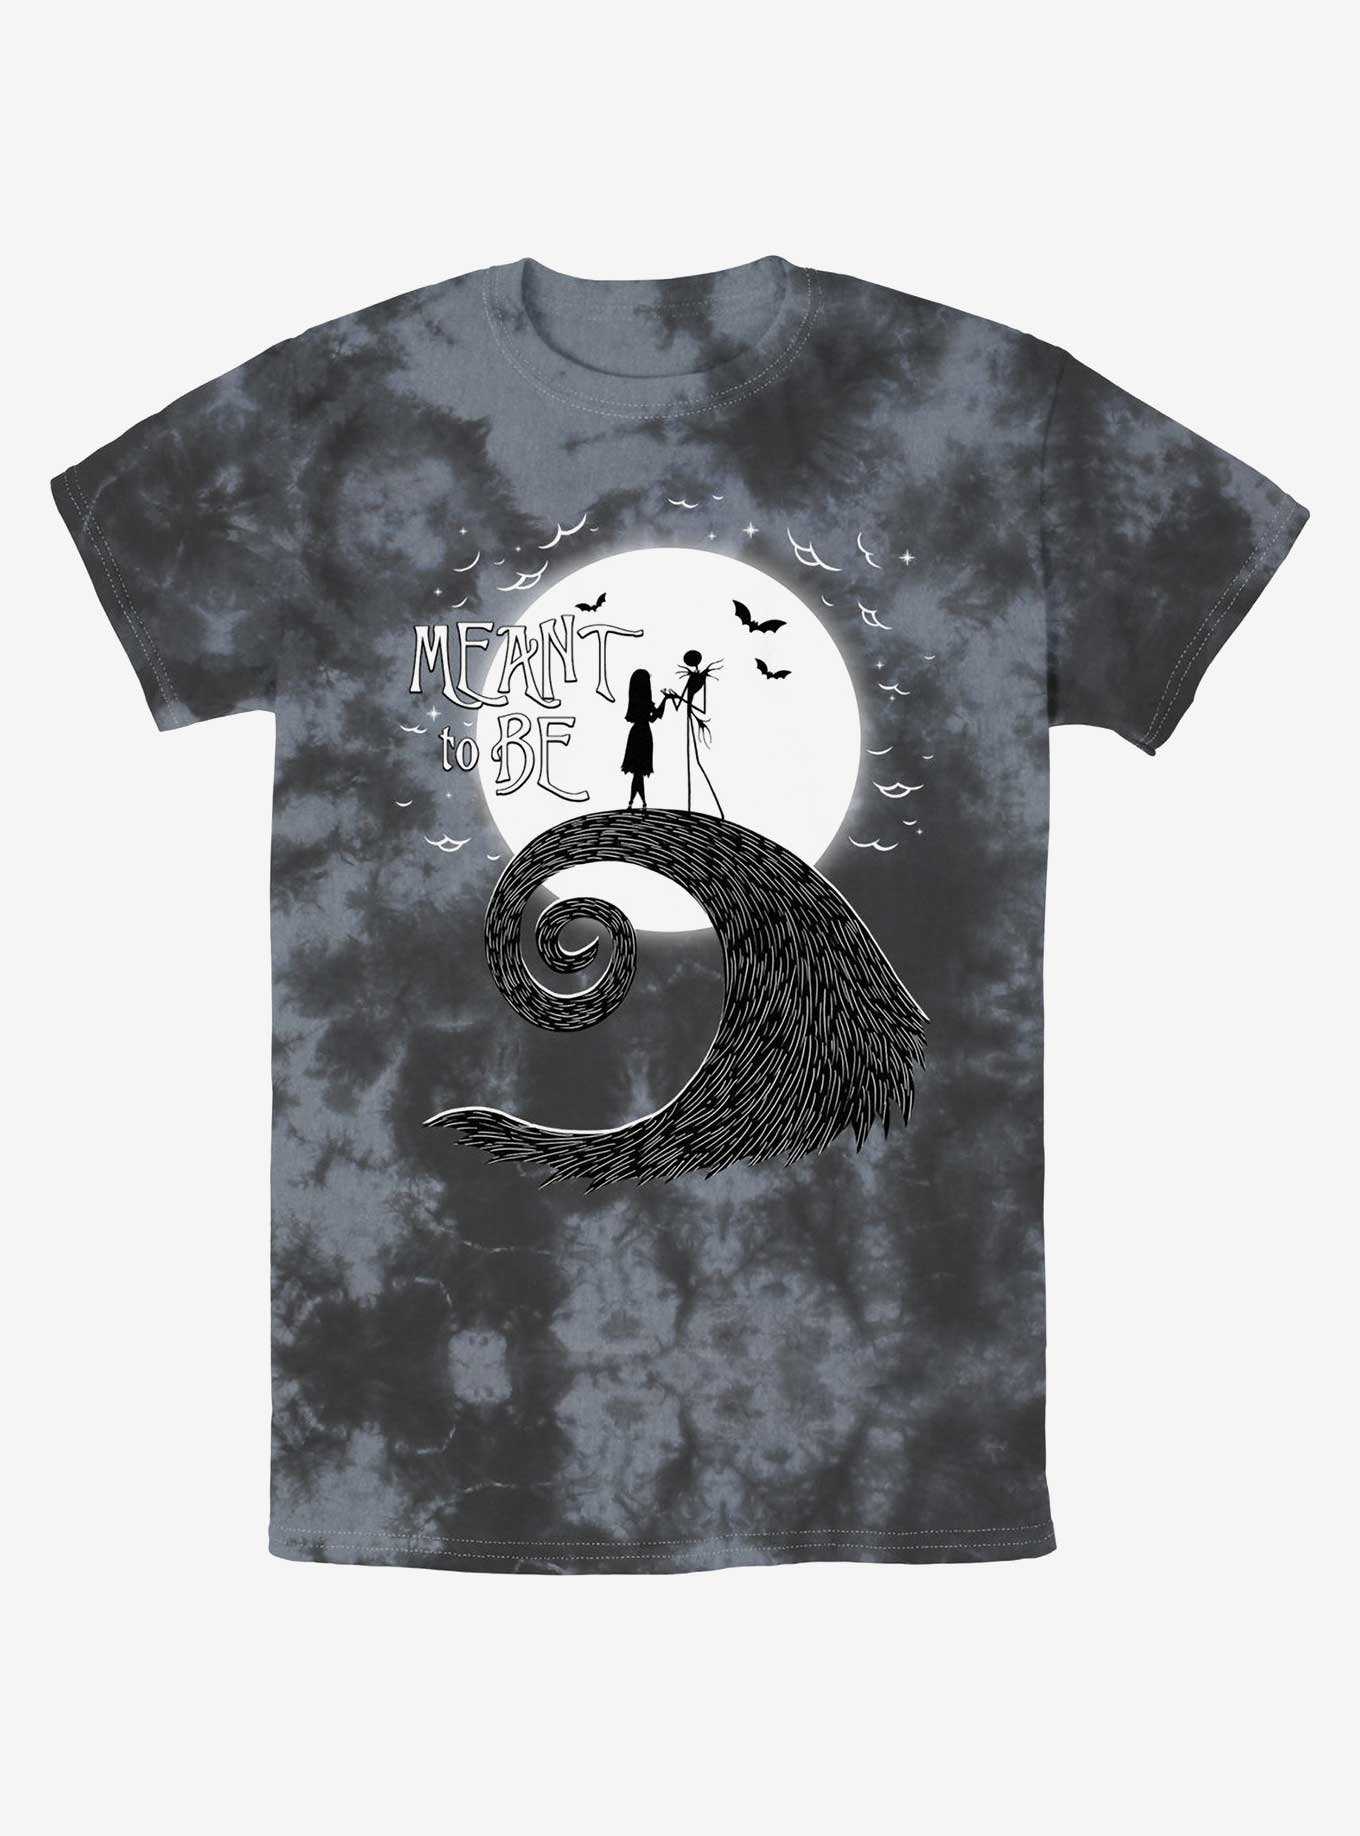 Disney The Nightmare Before Christmas Jack and Sally Meant To Be Tie-Dye T-Shirt, , hi-res